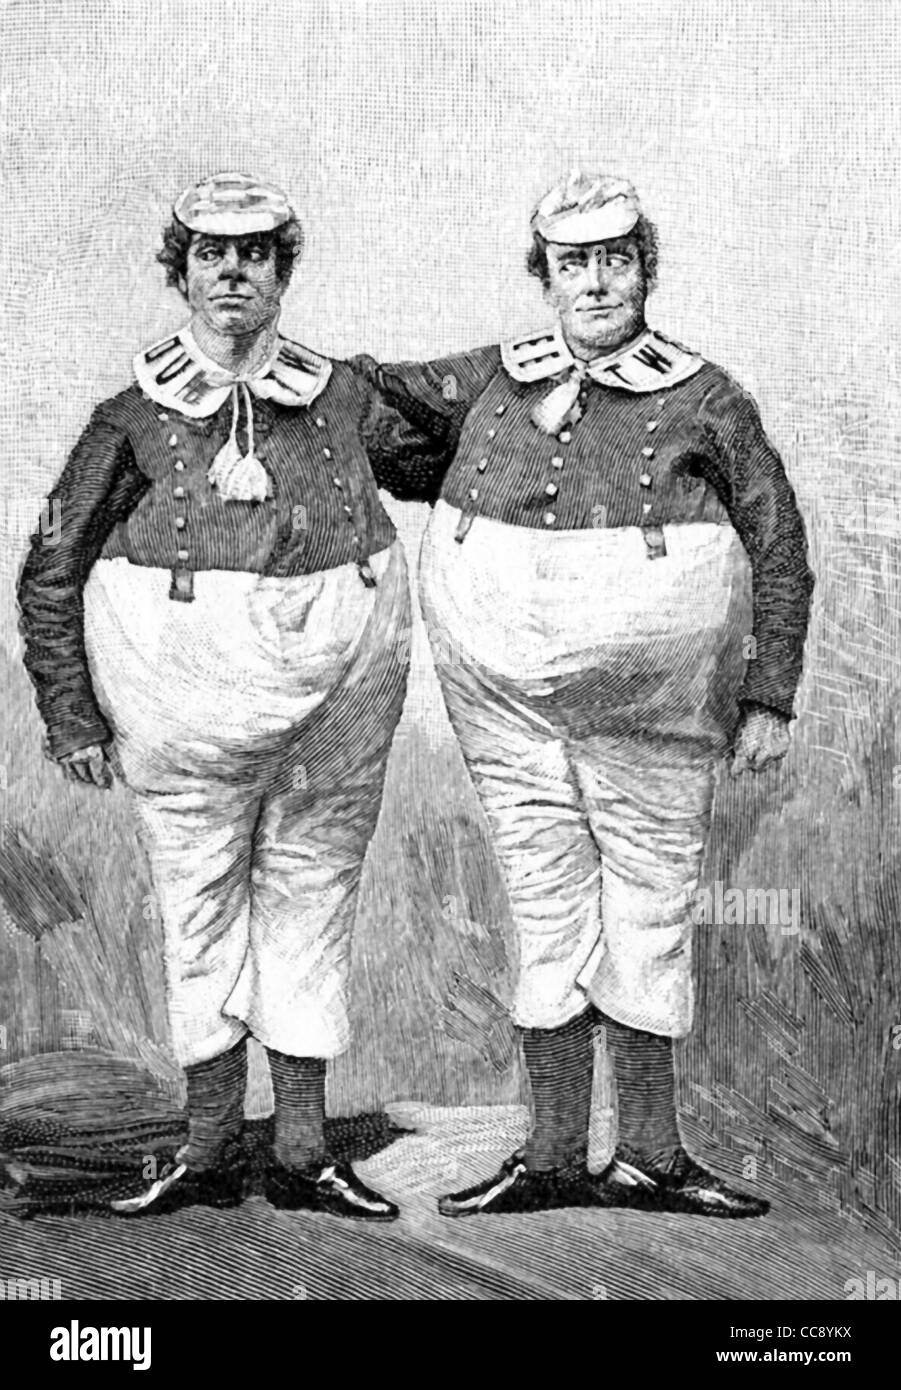 Tweedledum and Tweedledee are fictional characters in an old English nursery rhyme, and in a novel by Lewis Carroll. Stock Photo